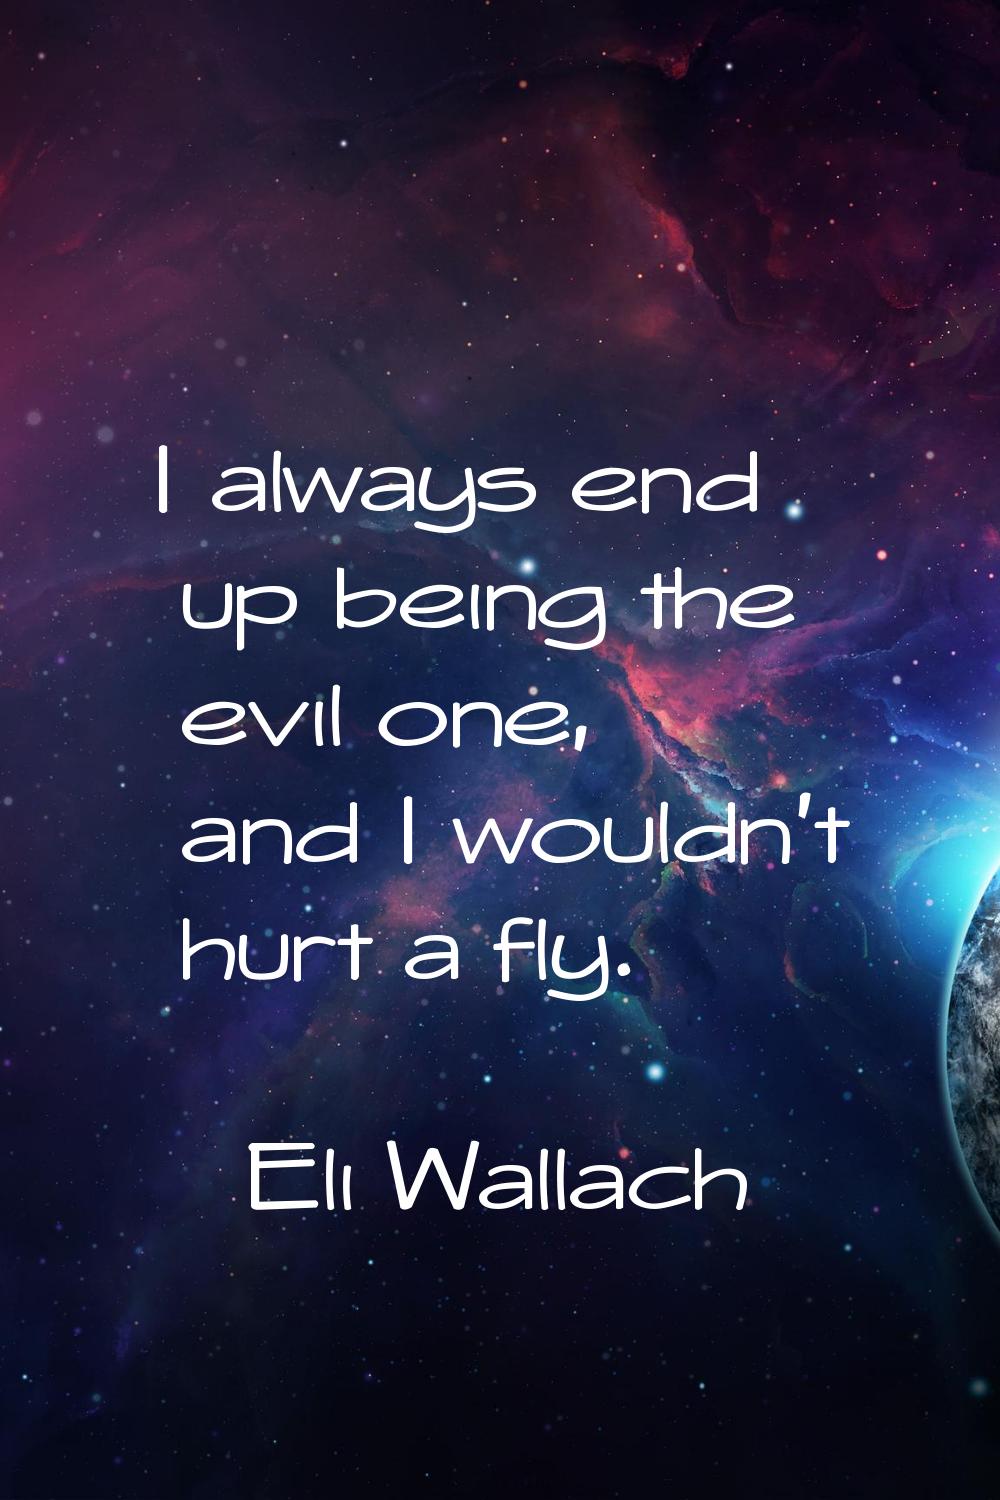 I always end up being the evil one, and I wouldn't hurt a fly.